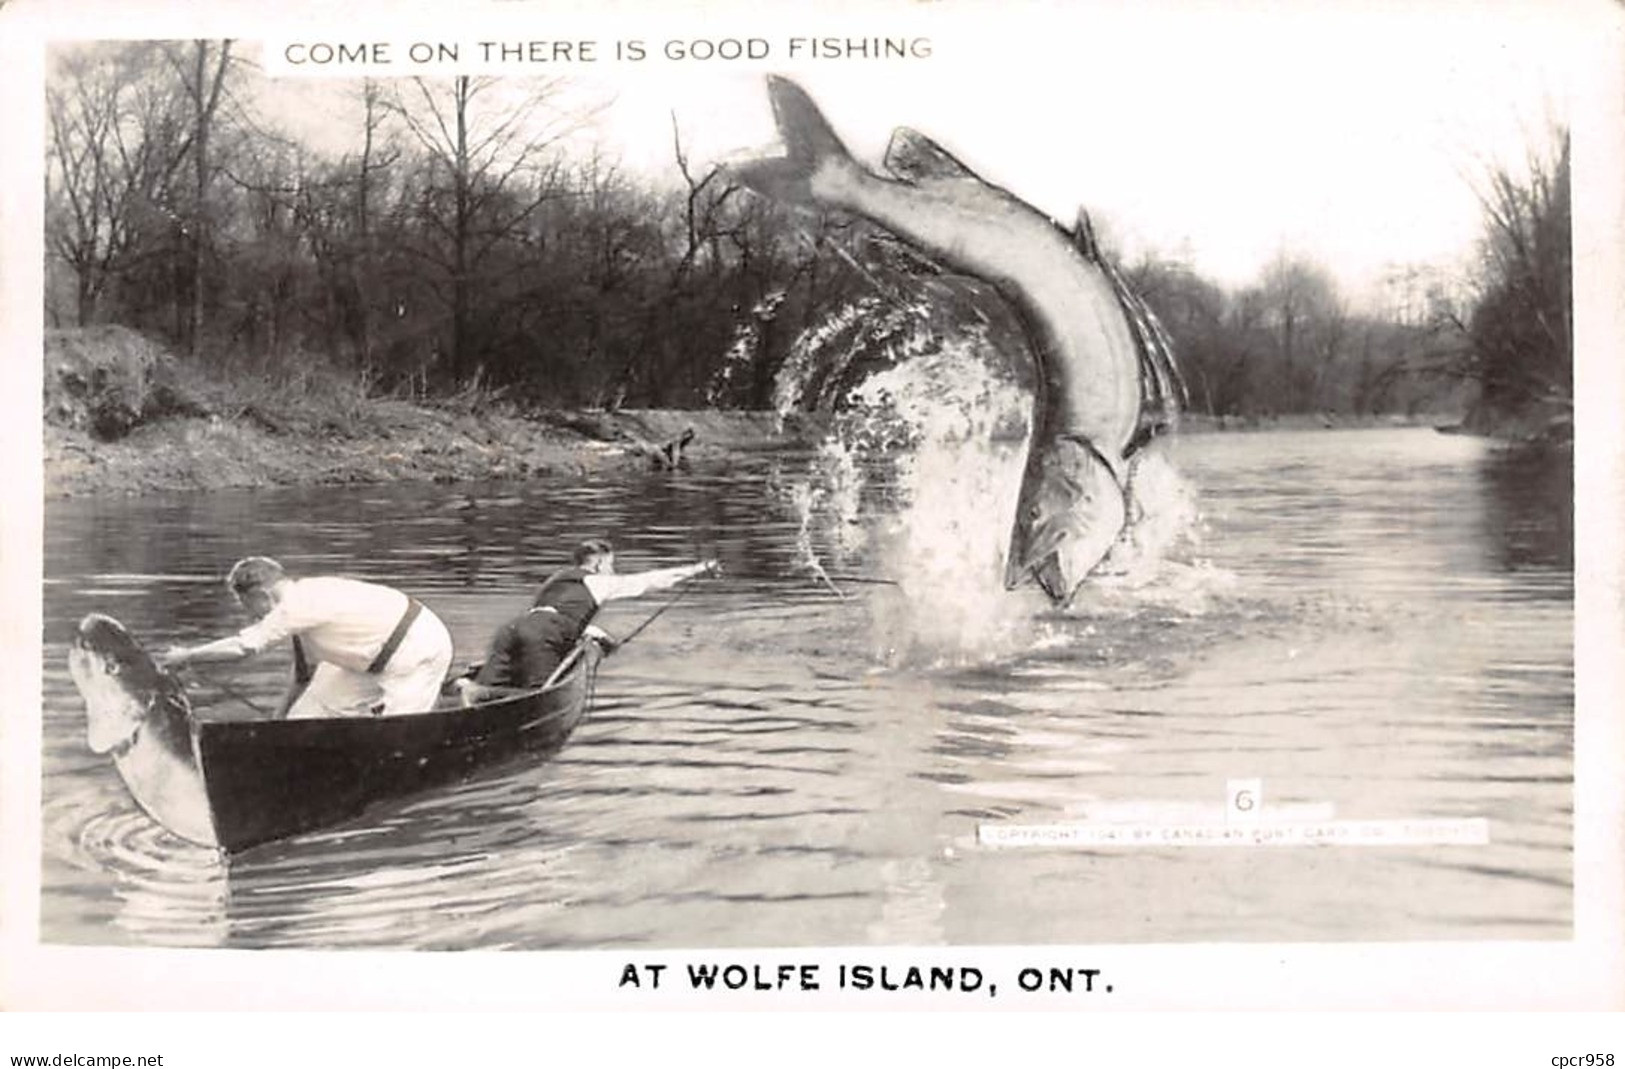 Sports - N°67108 - Pêche - Come On There Is Good Fishing - At Wolfe Island, Ont - Surréalisme Et Montage - Pesca